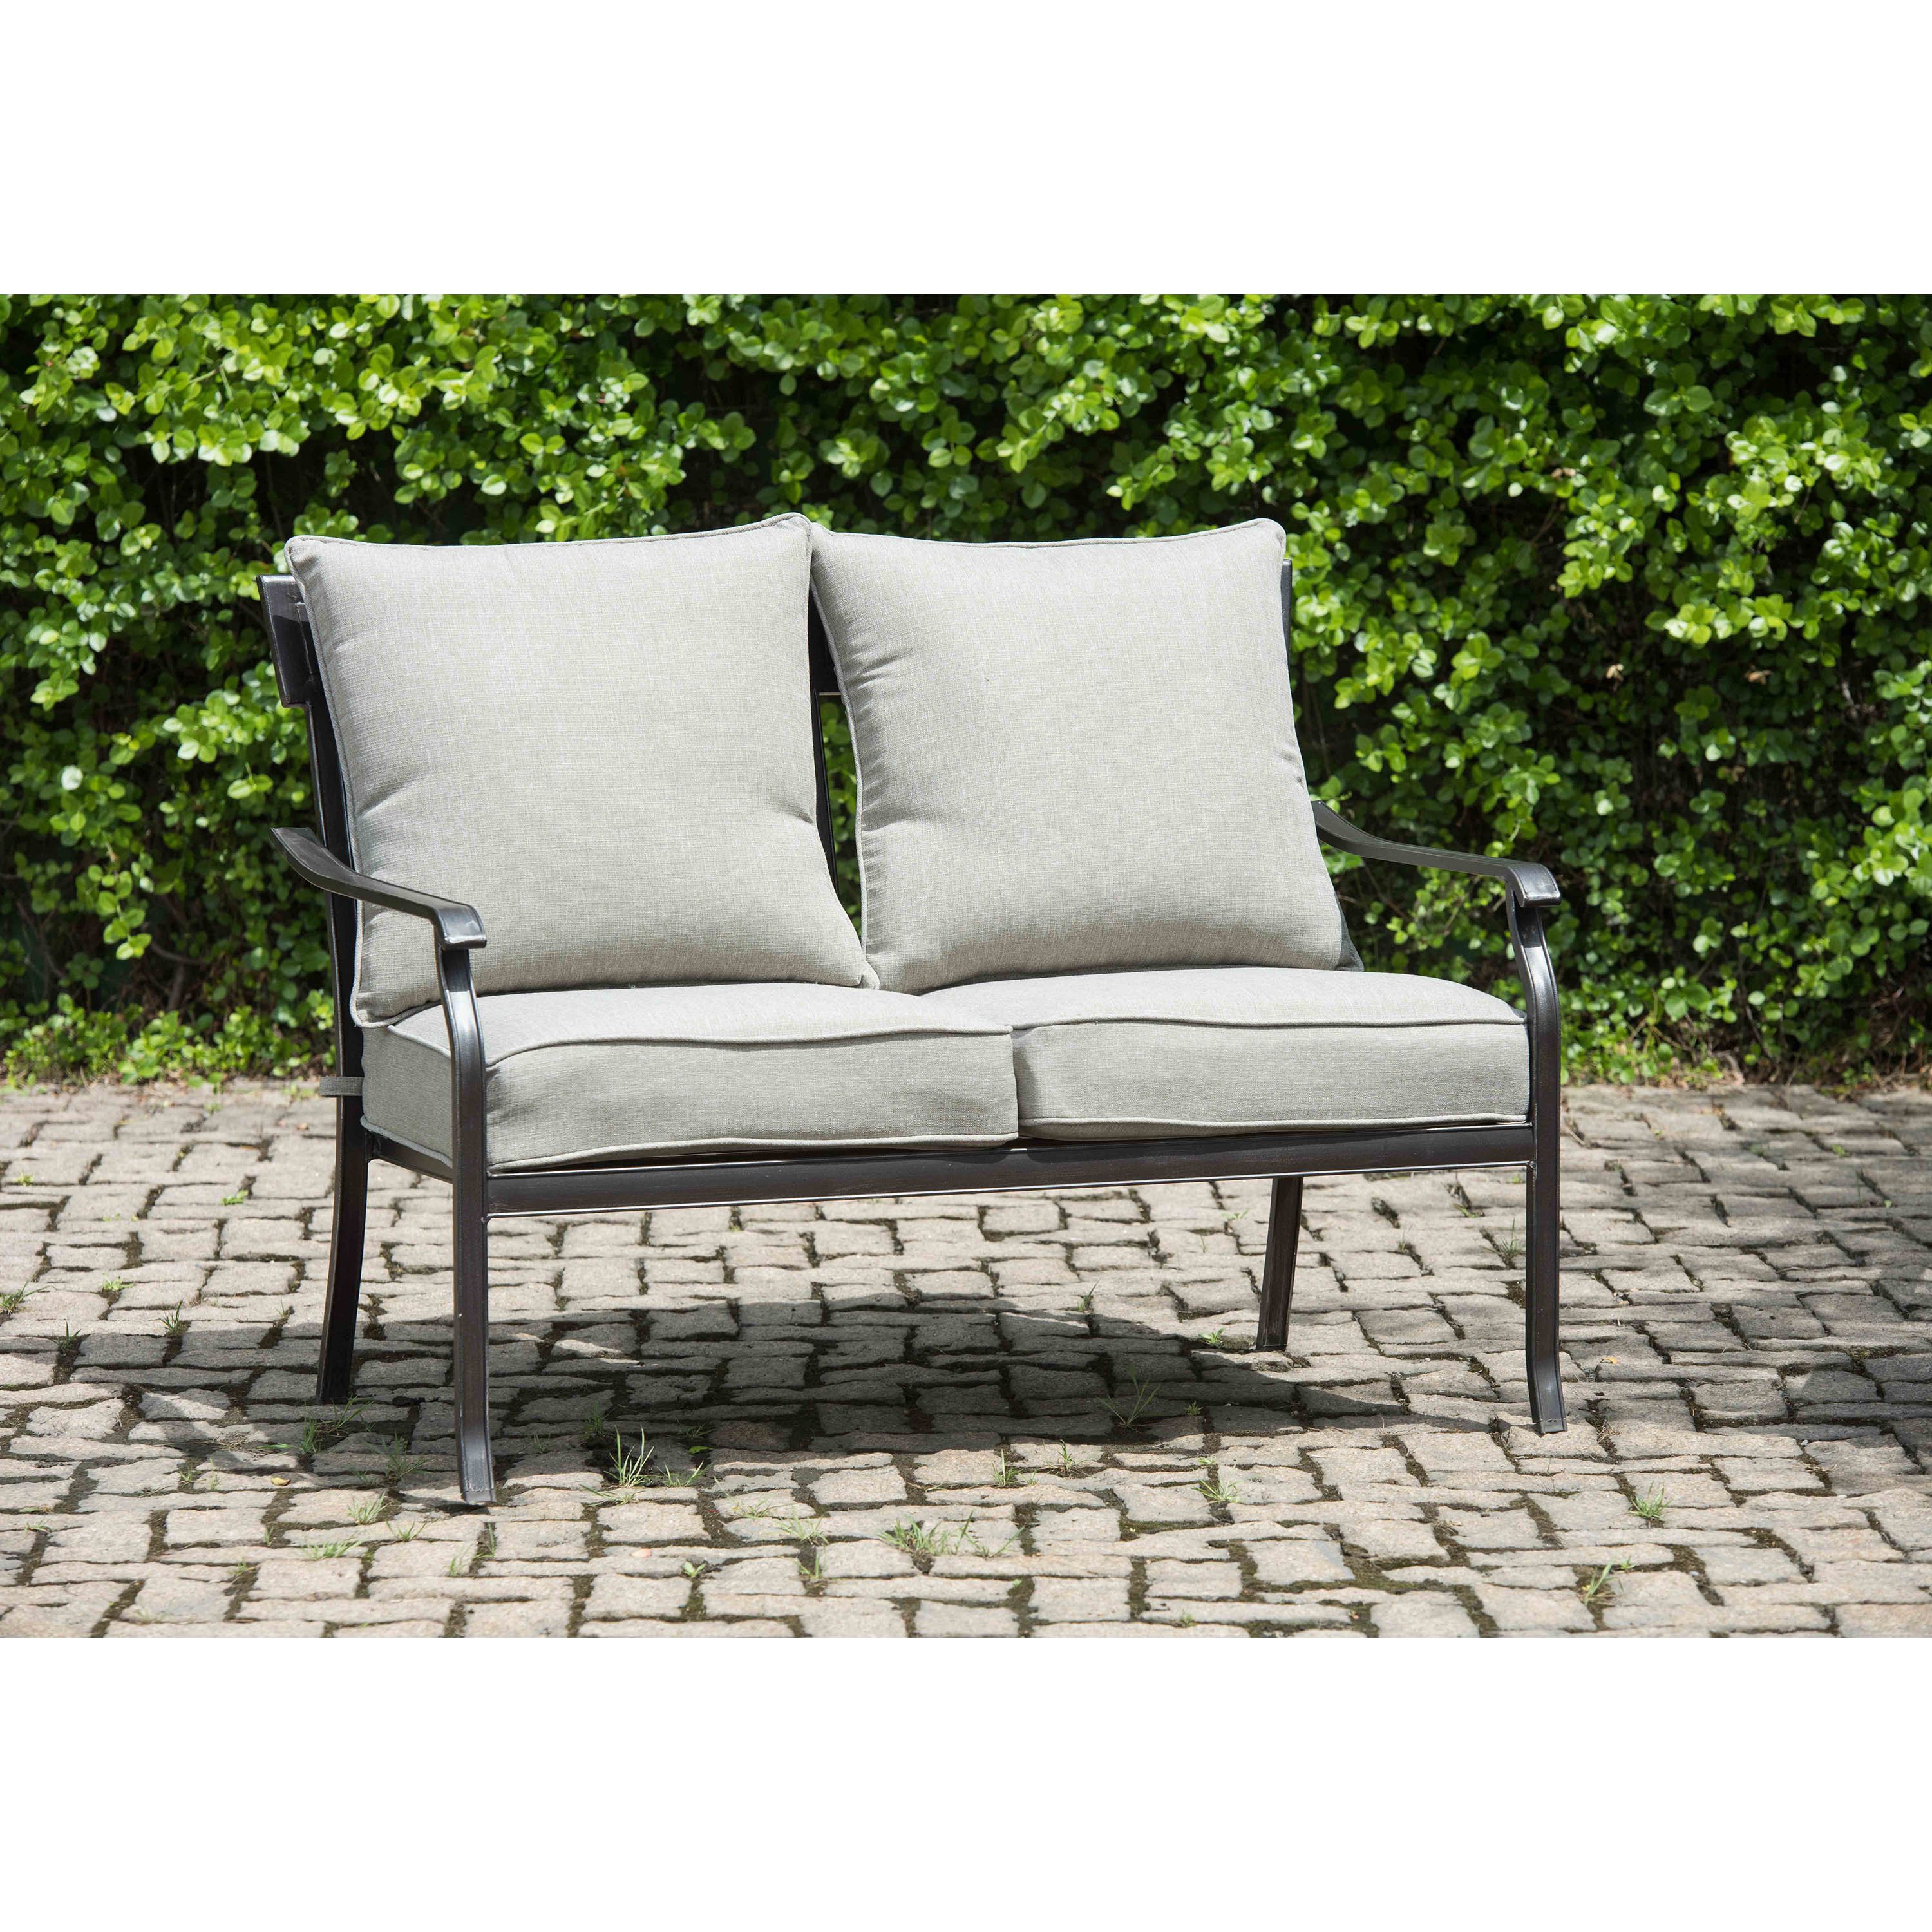 Calvin Patio Loveseats With Cushions Within 2019 Beeson Loveseat With Cushions (View 9 of 20)